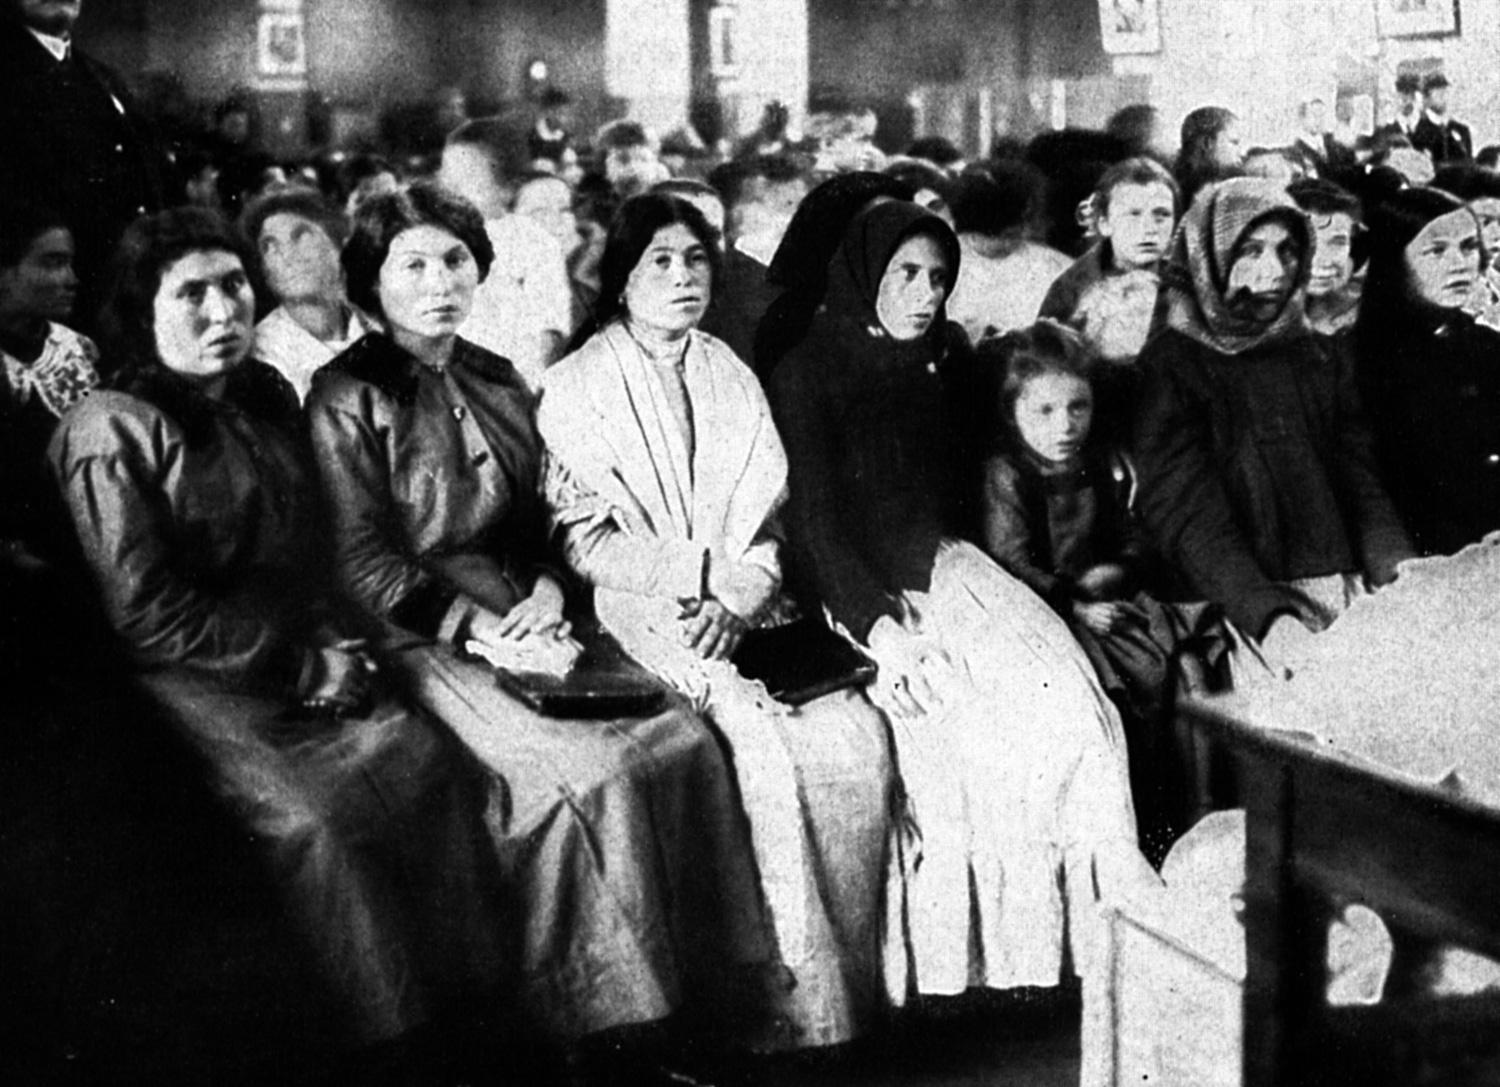 Many families trace their roots through Ellis Island, www.greatamericanthings.net